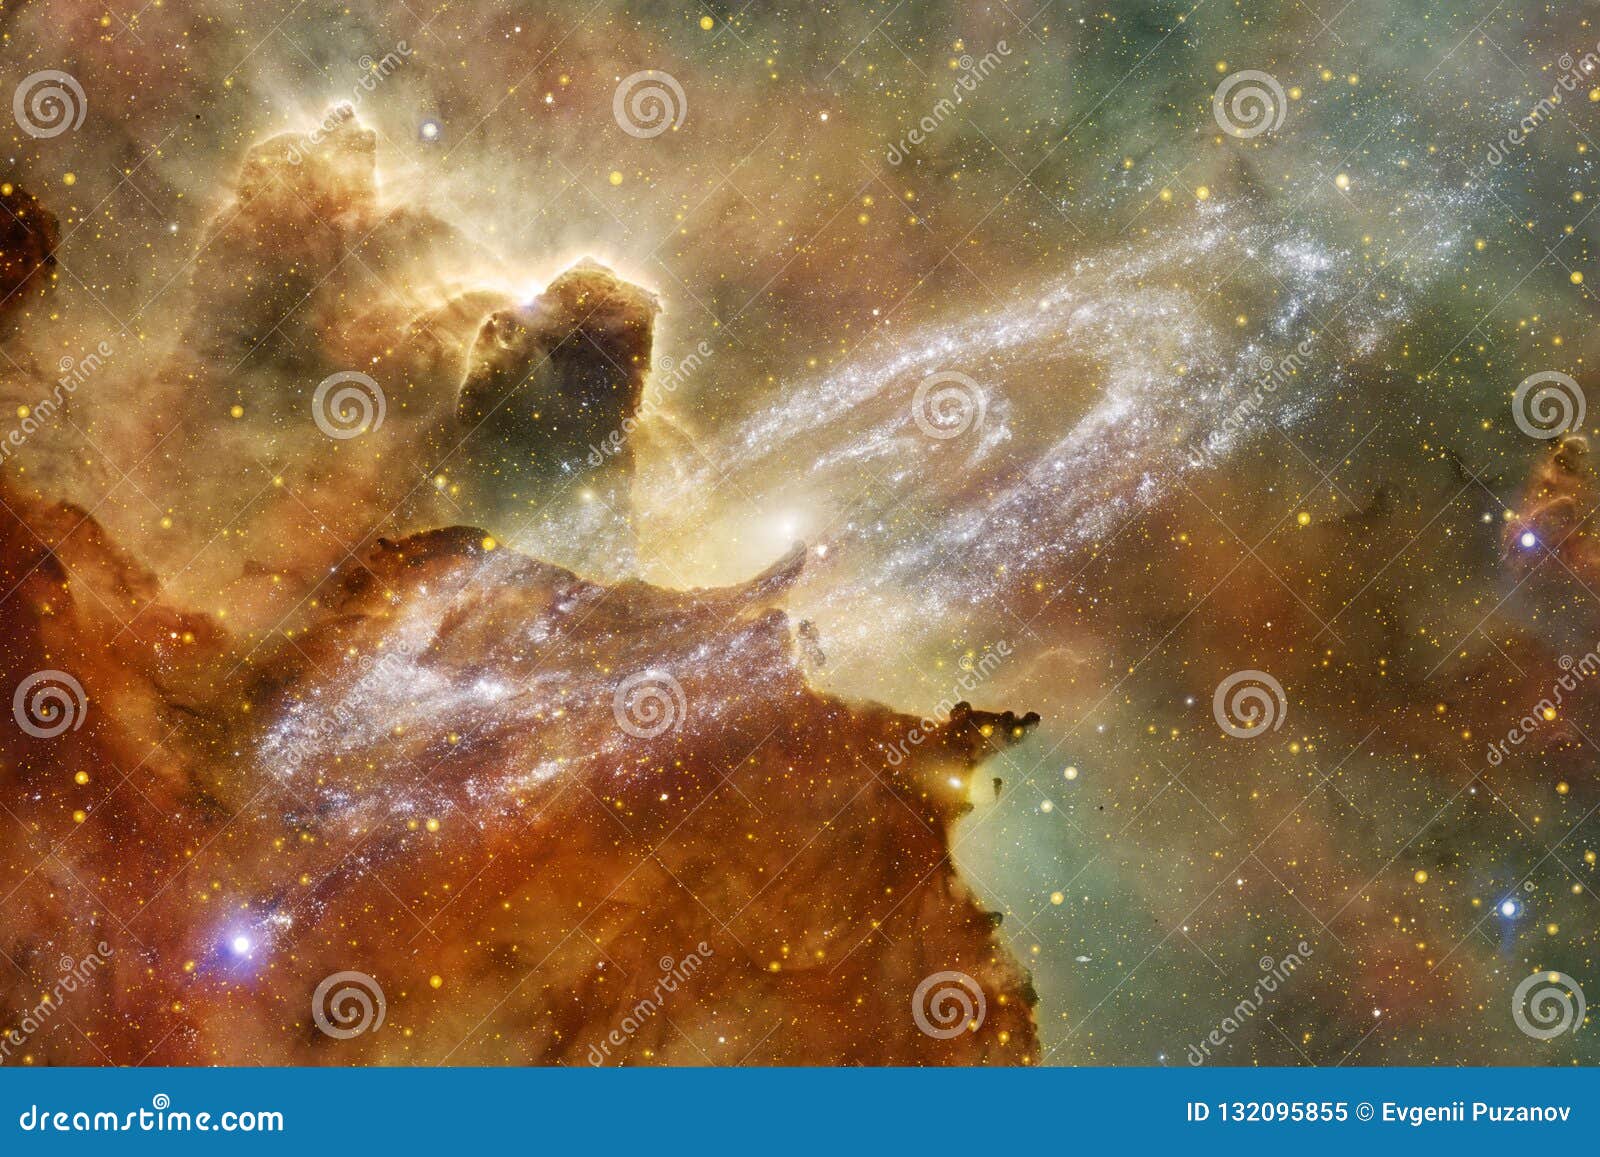 Nebulae and Stars in Deep Space. Cosmic Art, Science Fiction Wallpaper